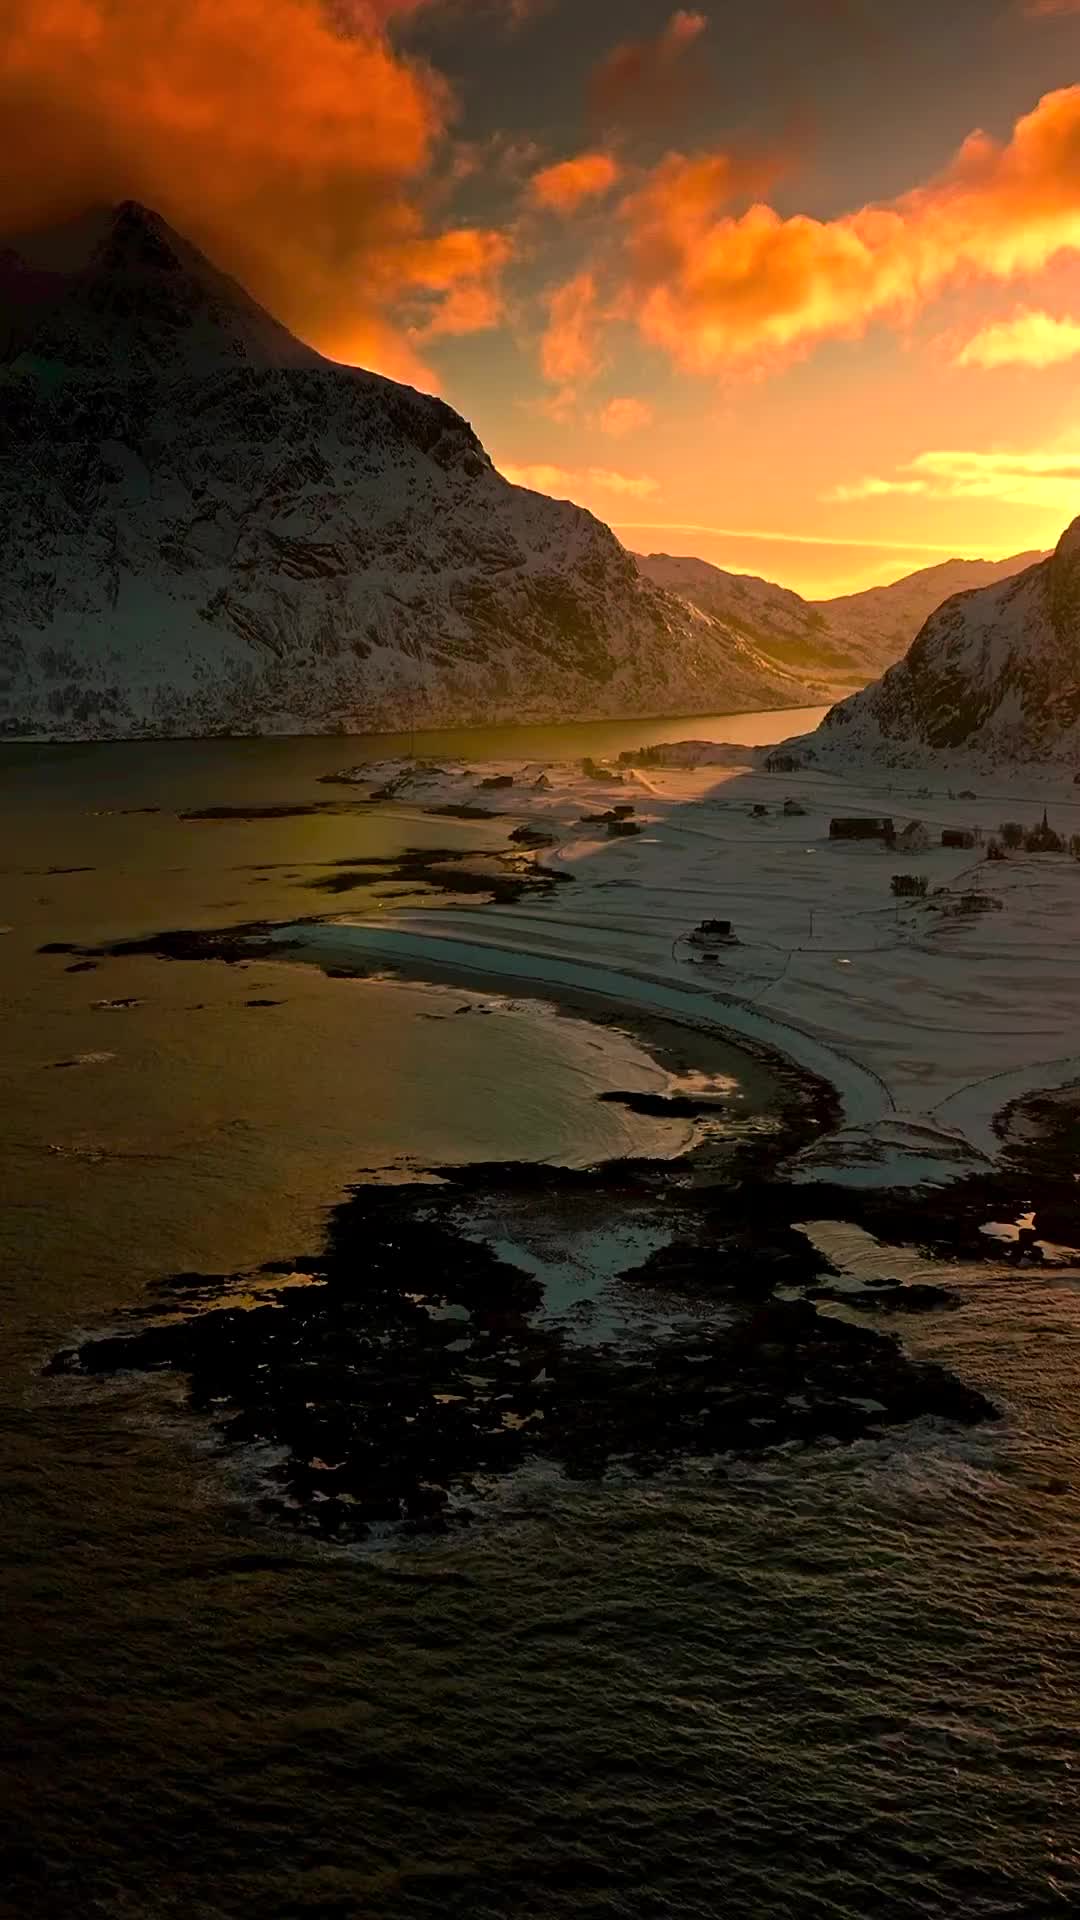 Discover Tranquil Beauty in Lofoten Islands Sunset